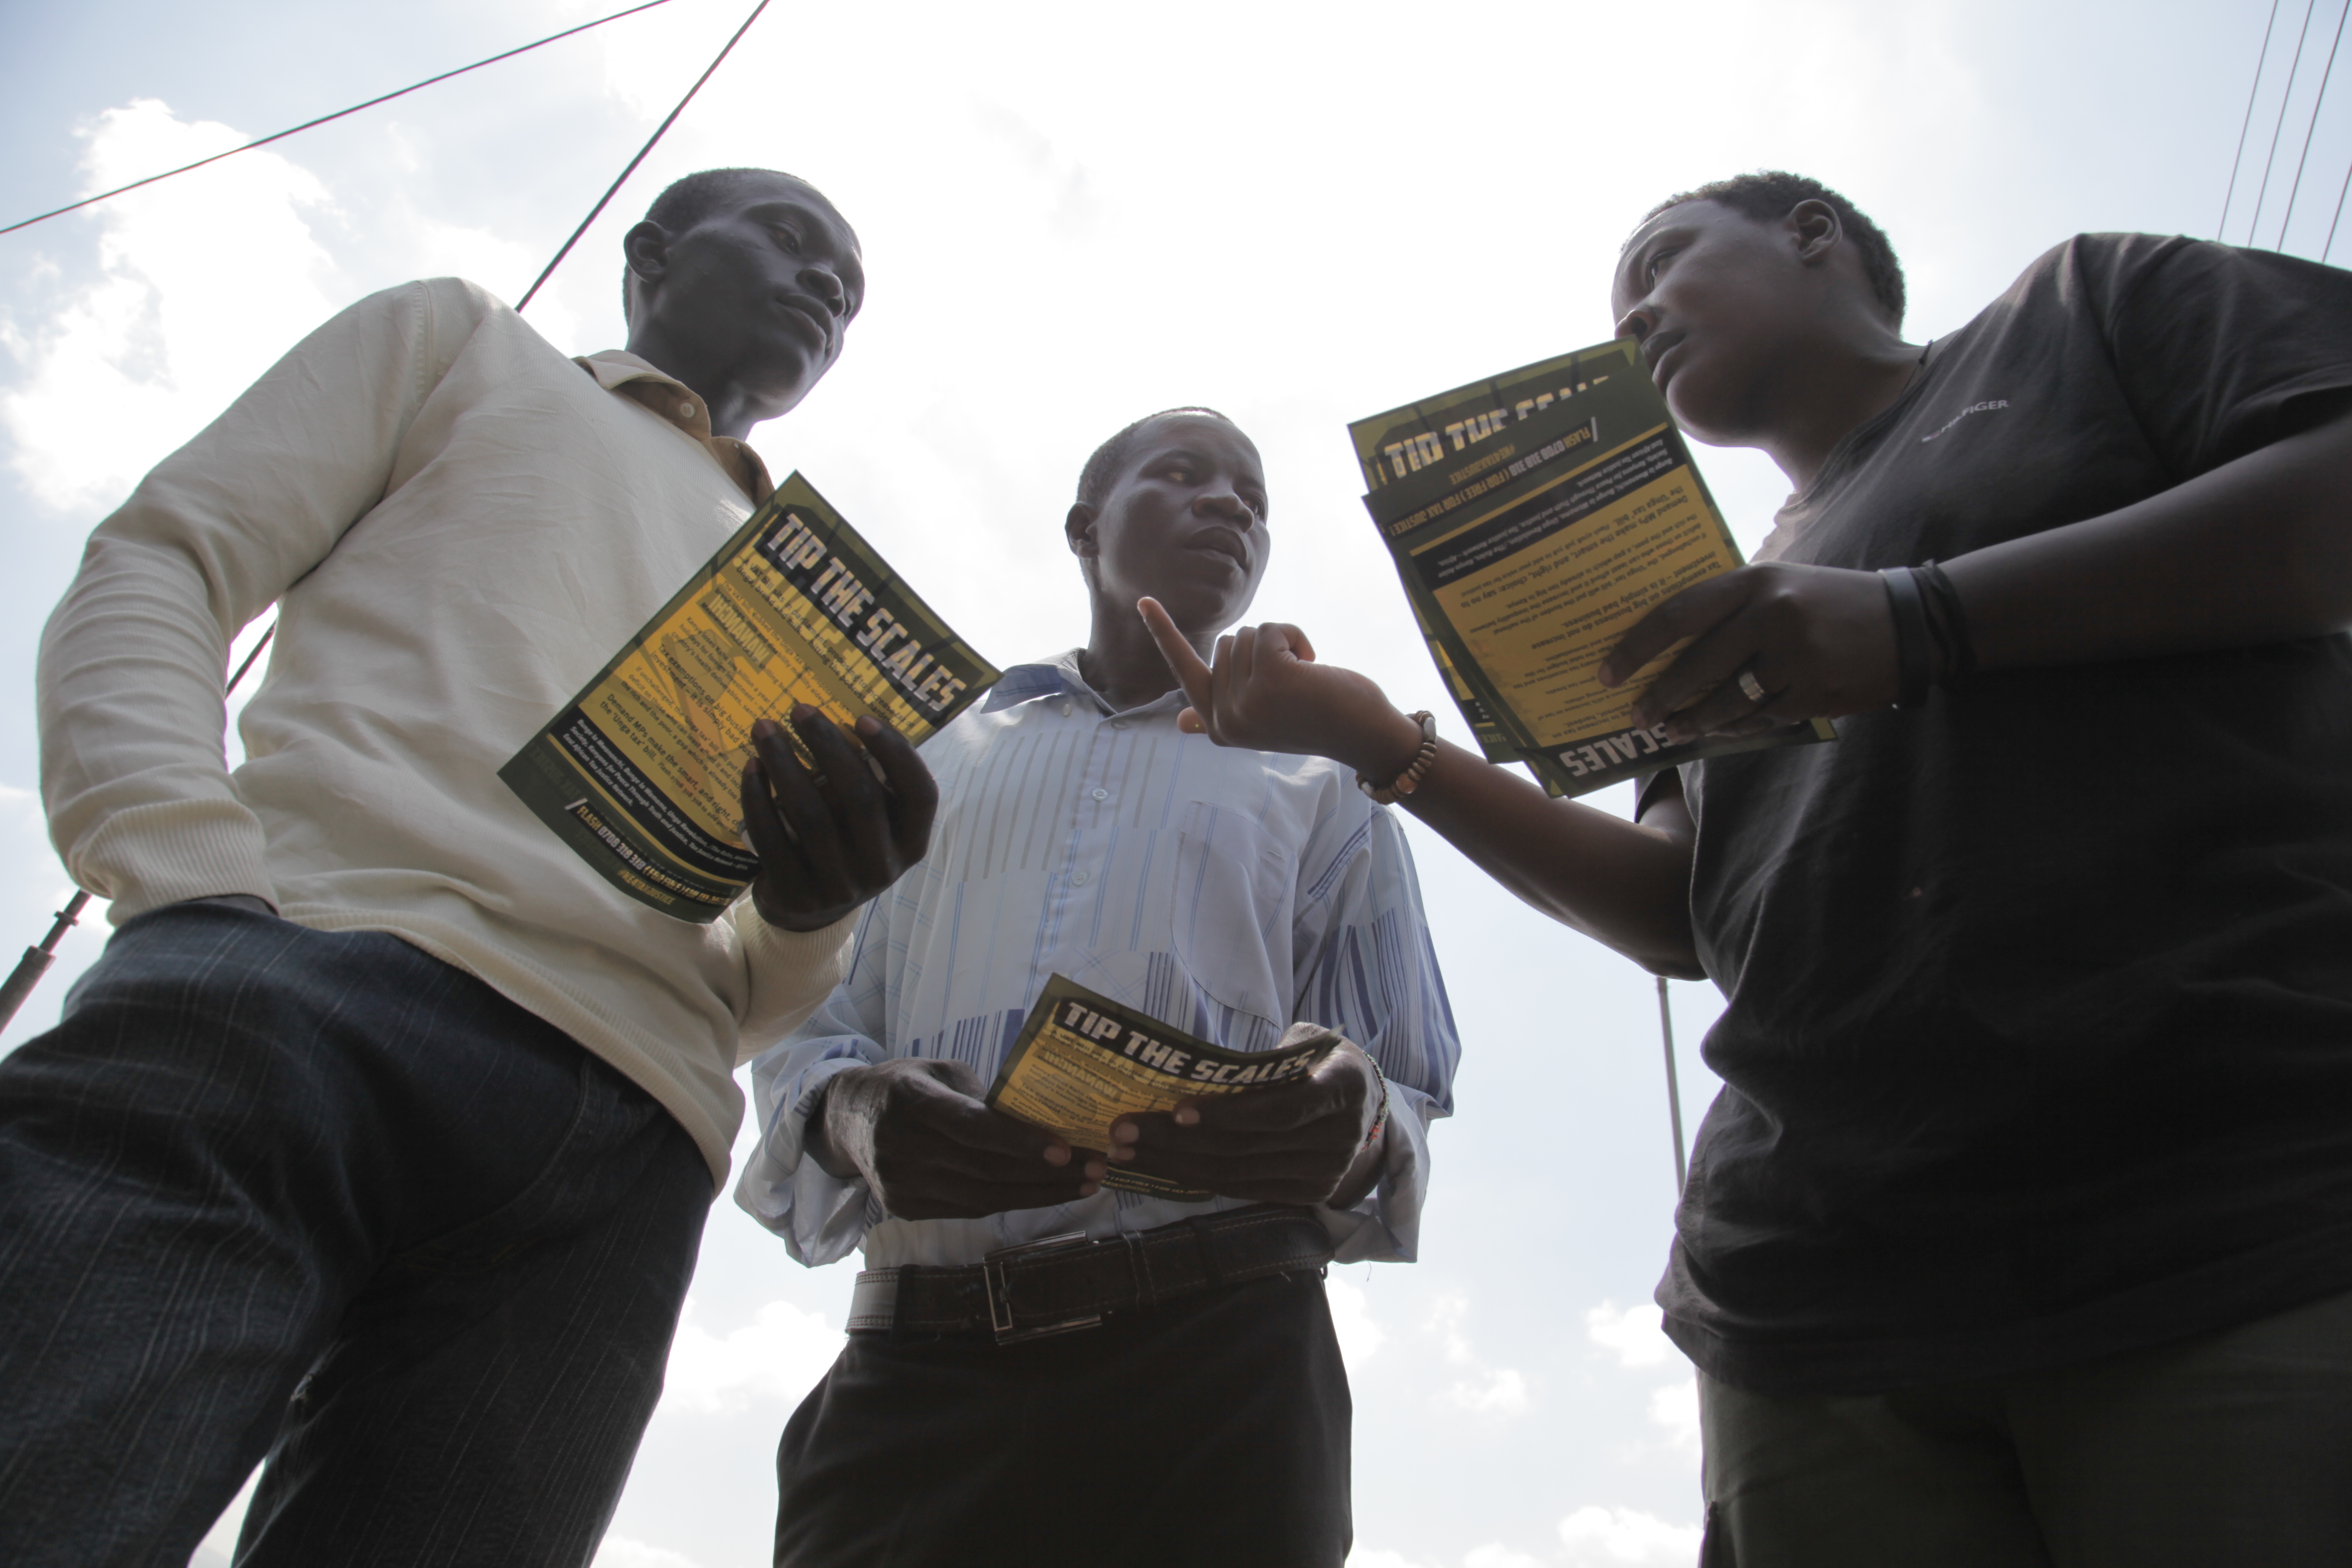 Blessol Gathoni (r), an activist with the Kenyans for Tax Justice campaign talks to residents of Shauri Moyo about the government’s proposed VAT bill. Credit: Zahra Moloo/IPS